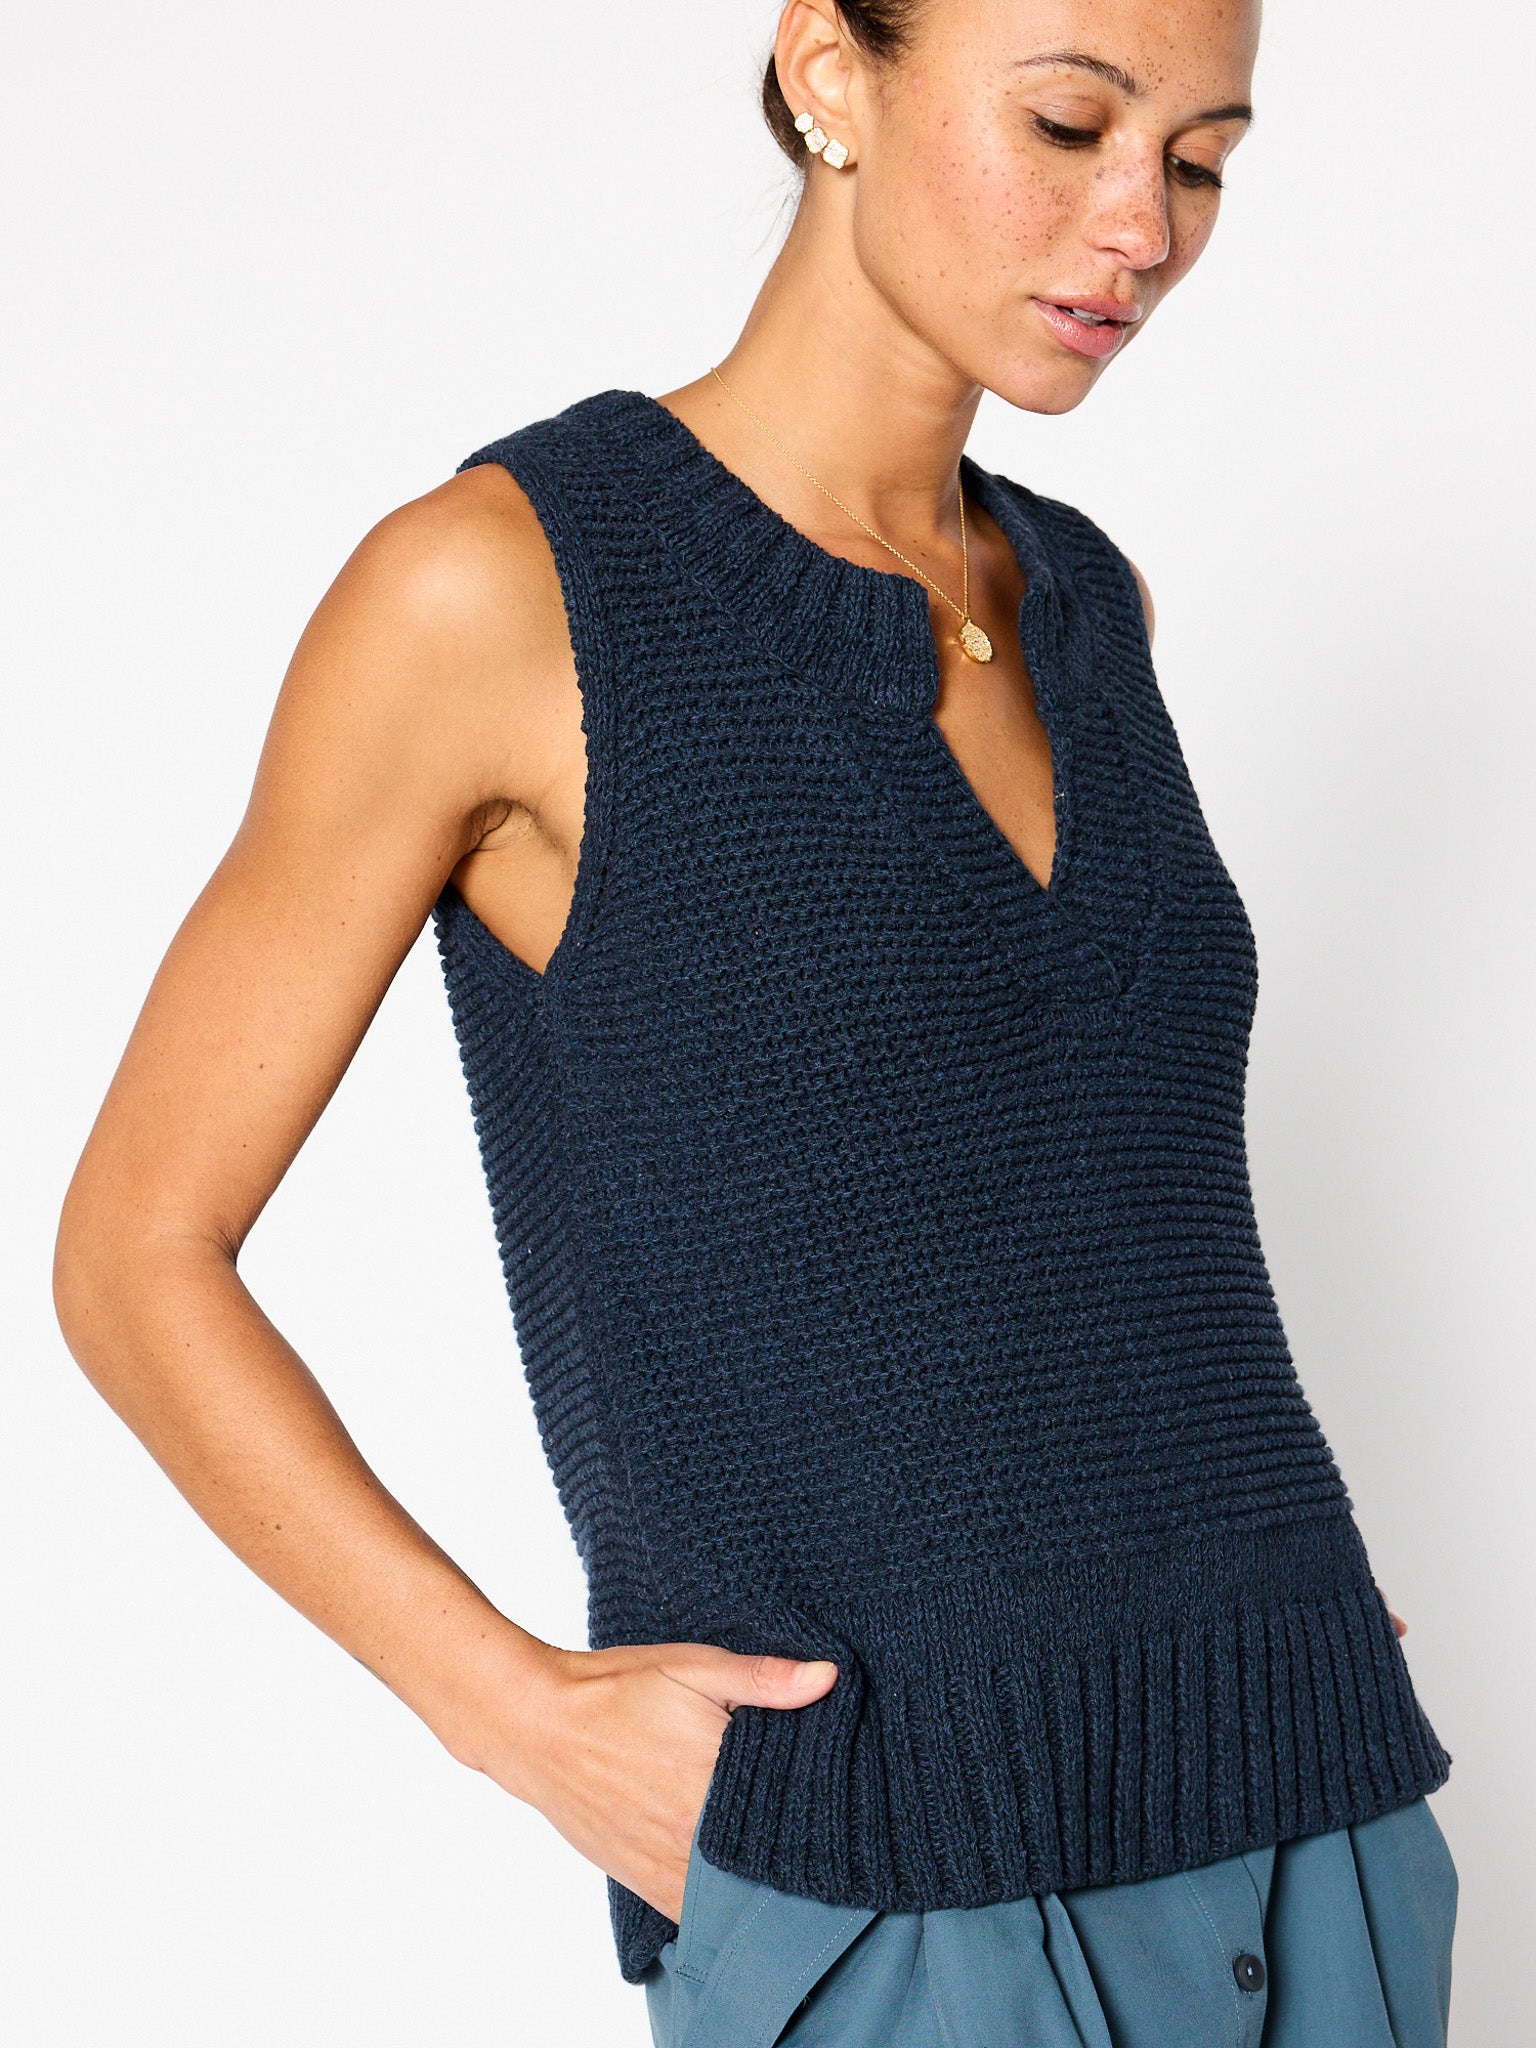 Roe v-neck cotton-linen navy sweater tank side view